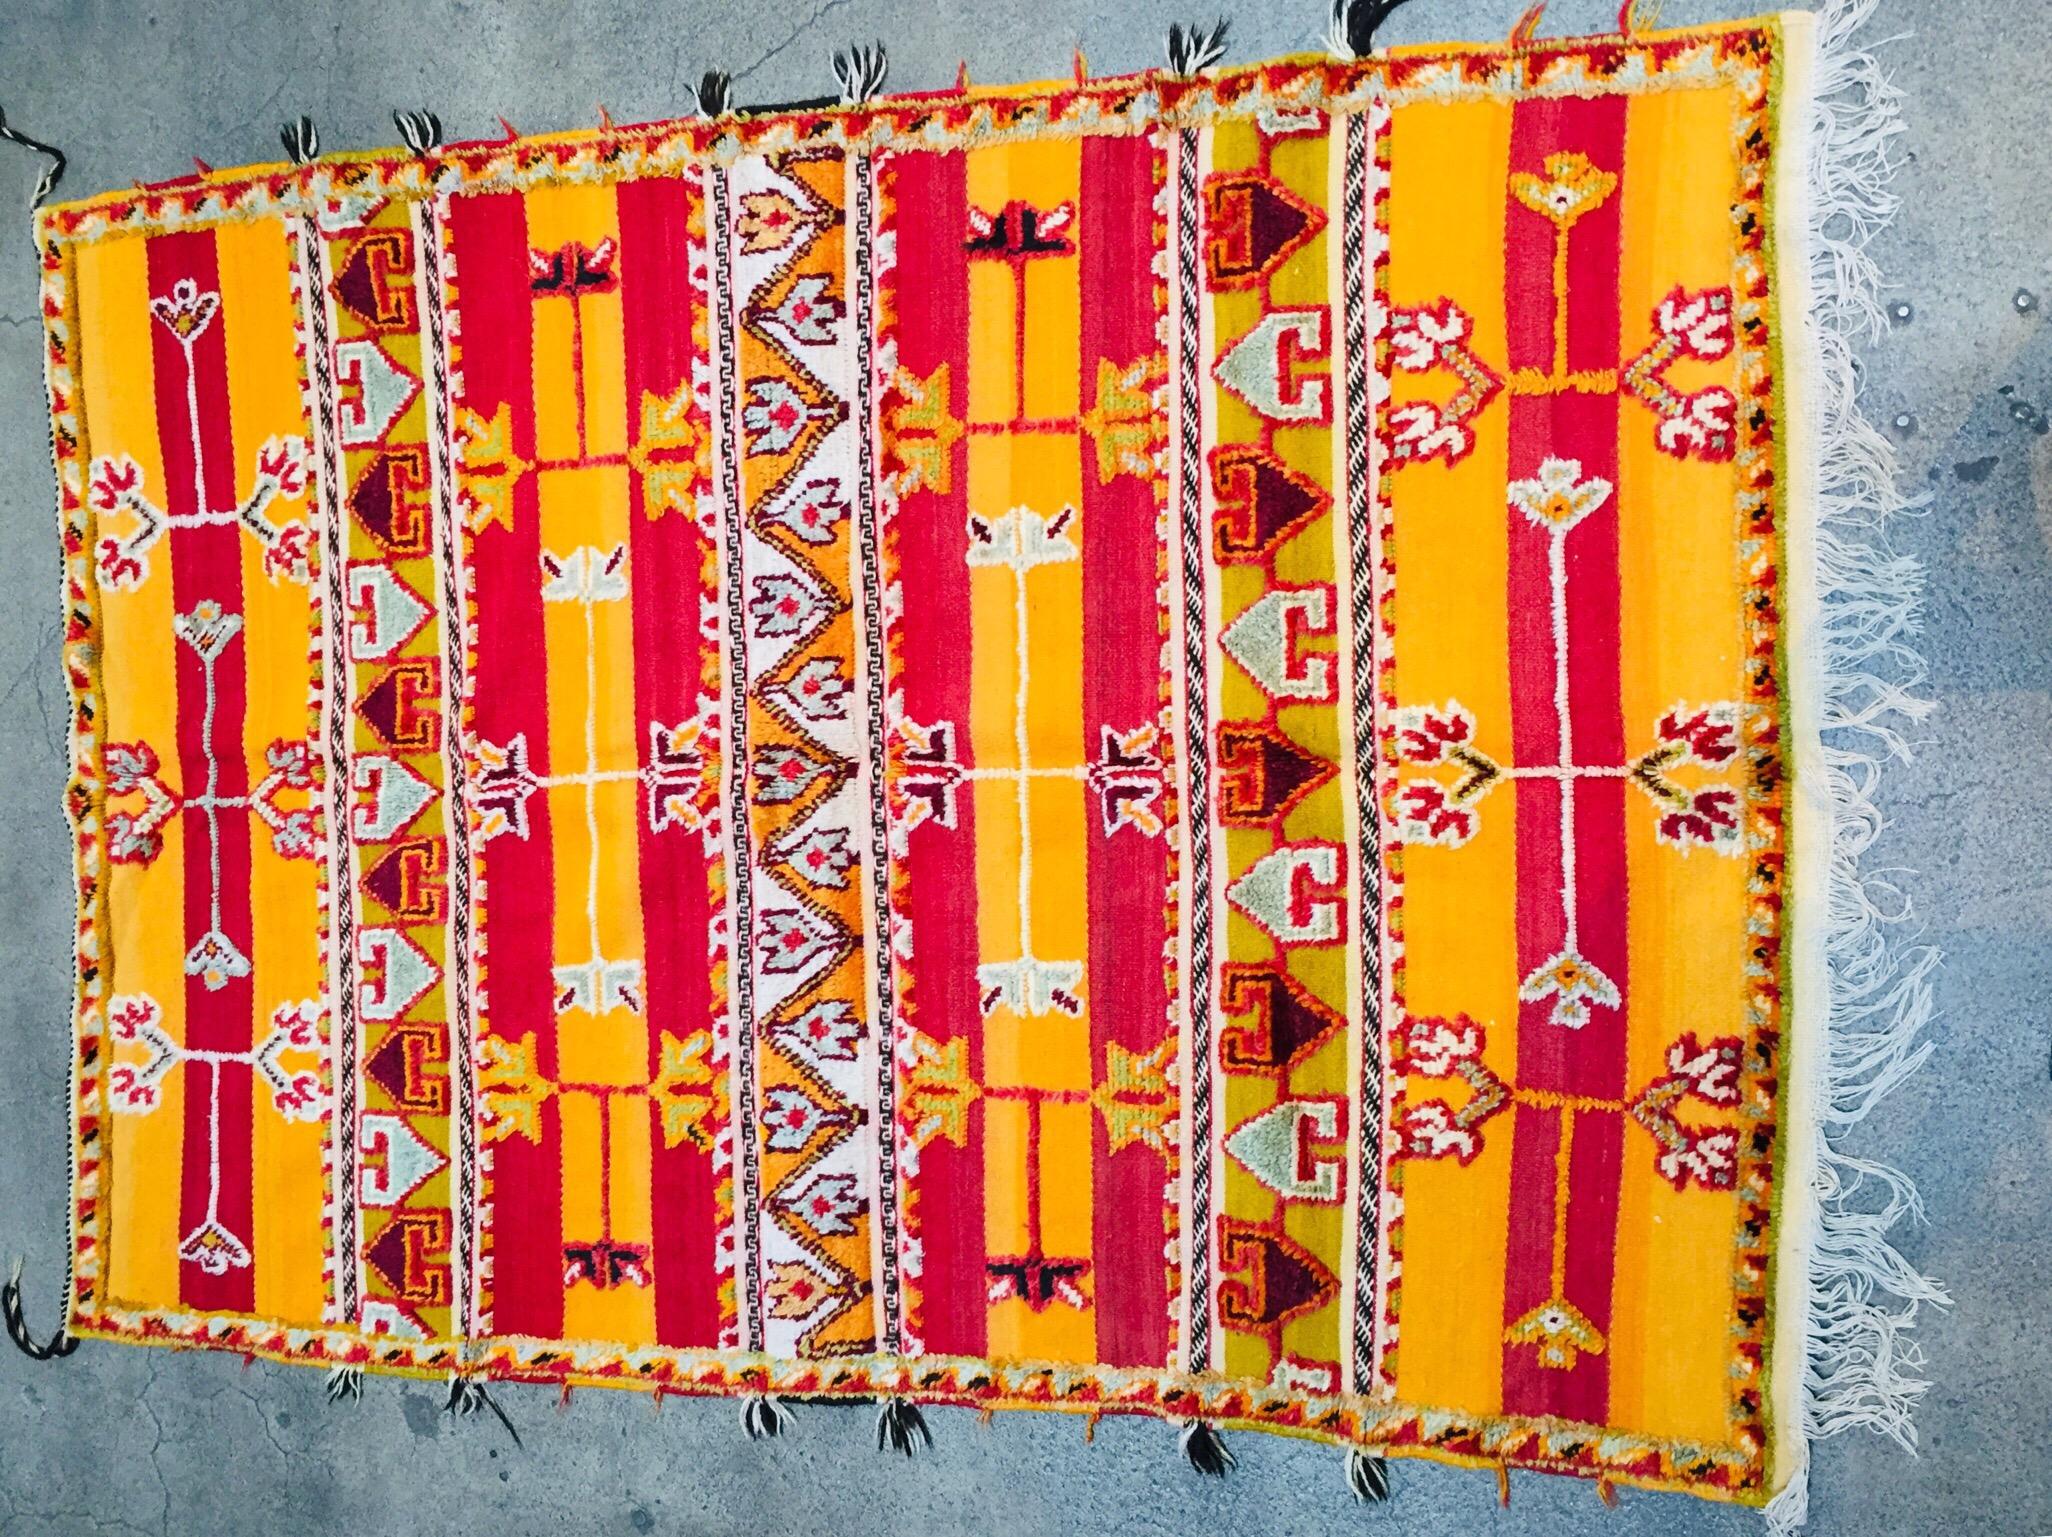 Moroccan vintage tribal rug, handwoven by Berber women in Morocco.
Great mix of organic wool and cotton in hearth colors with flat-weaves and pile wool mixed weaves.
This kind of rug is typical of the Glaoui tribes of Morocco.
Great North African